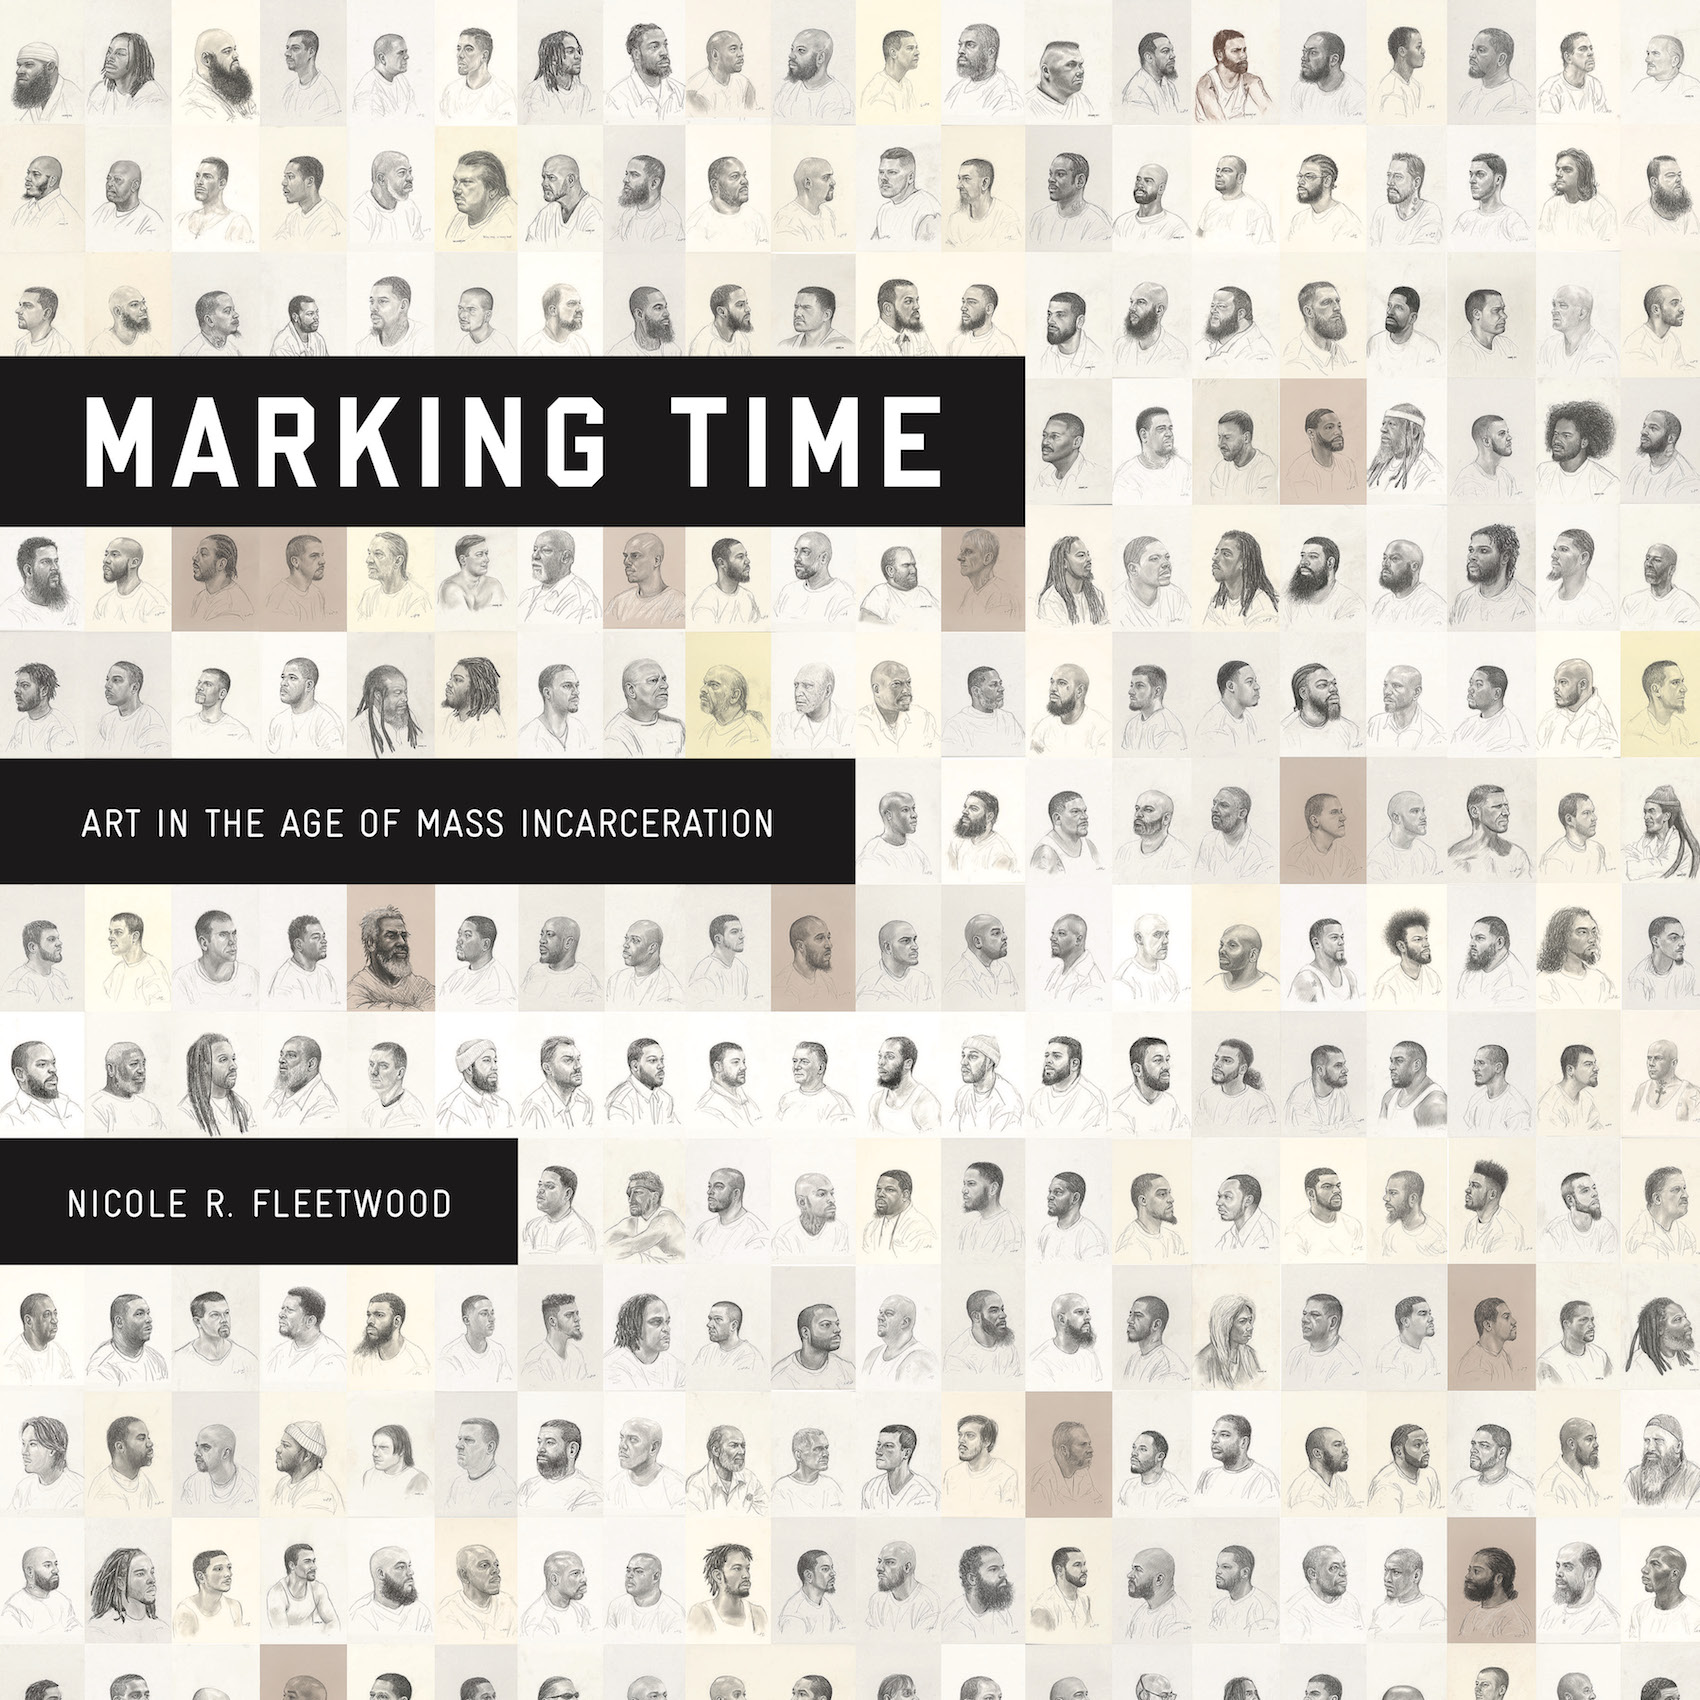 Cover of "Marking Time" book.